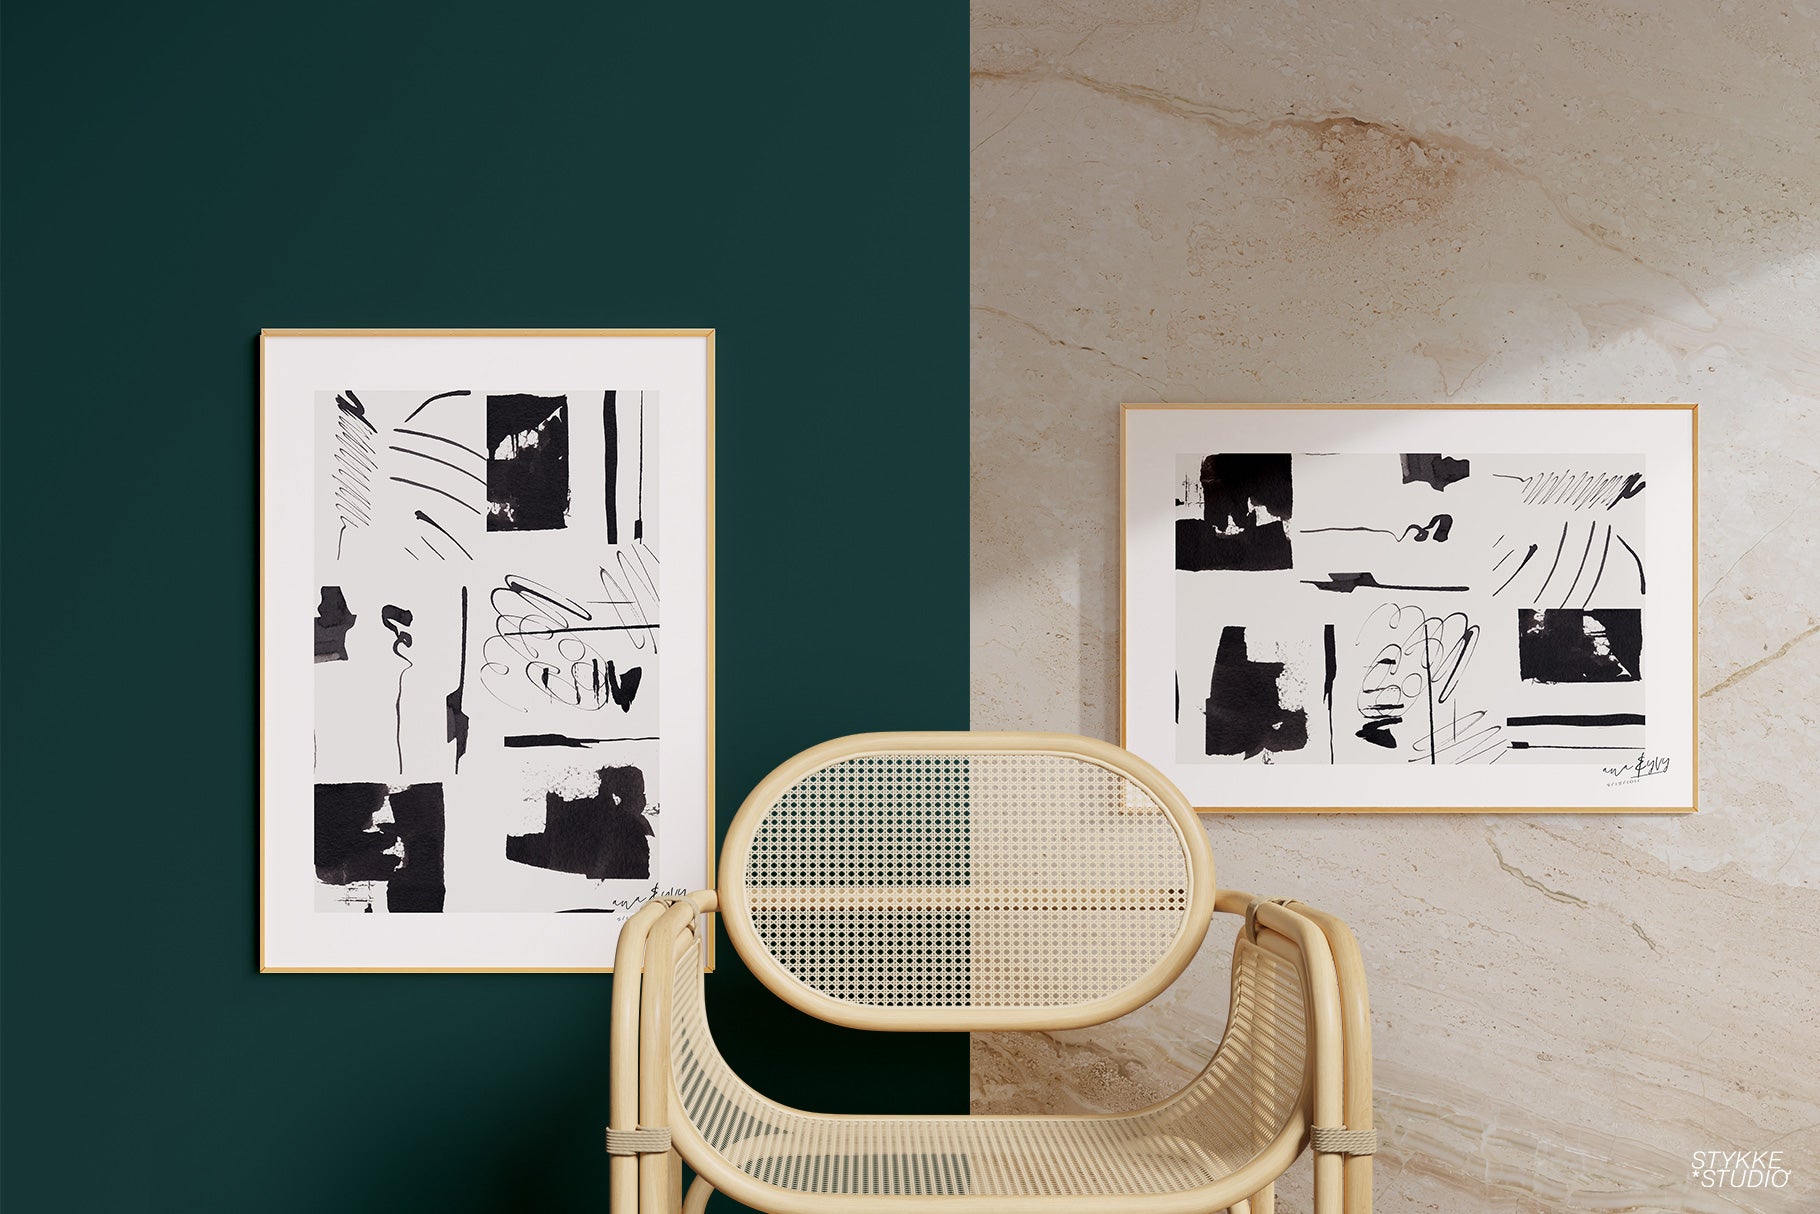 THE MINIMALIST NO.1 | The Thin Frame Essential Mockup Collection - Stykke Studio